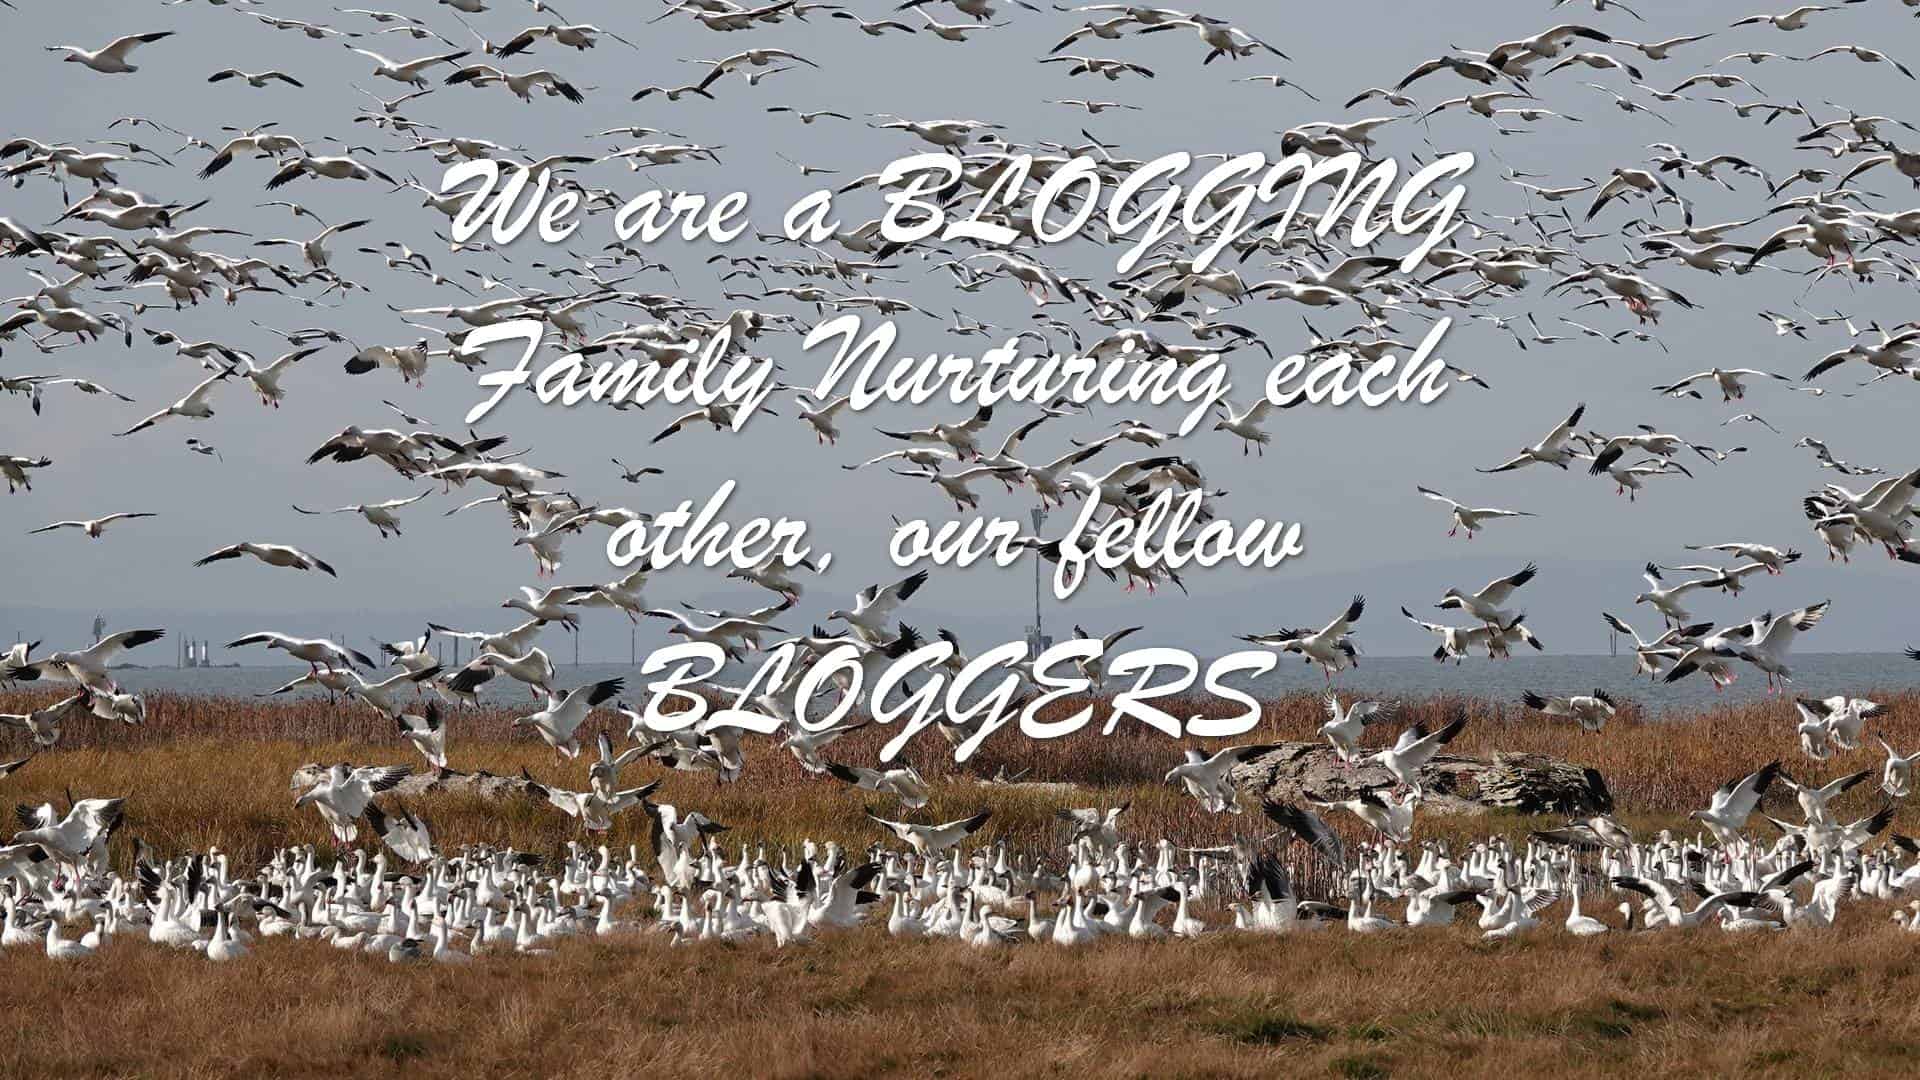 We are a BLOGGING Family Nurturing each other, our fellow BLOGGERS